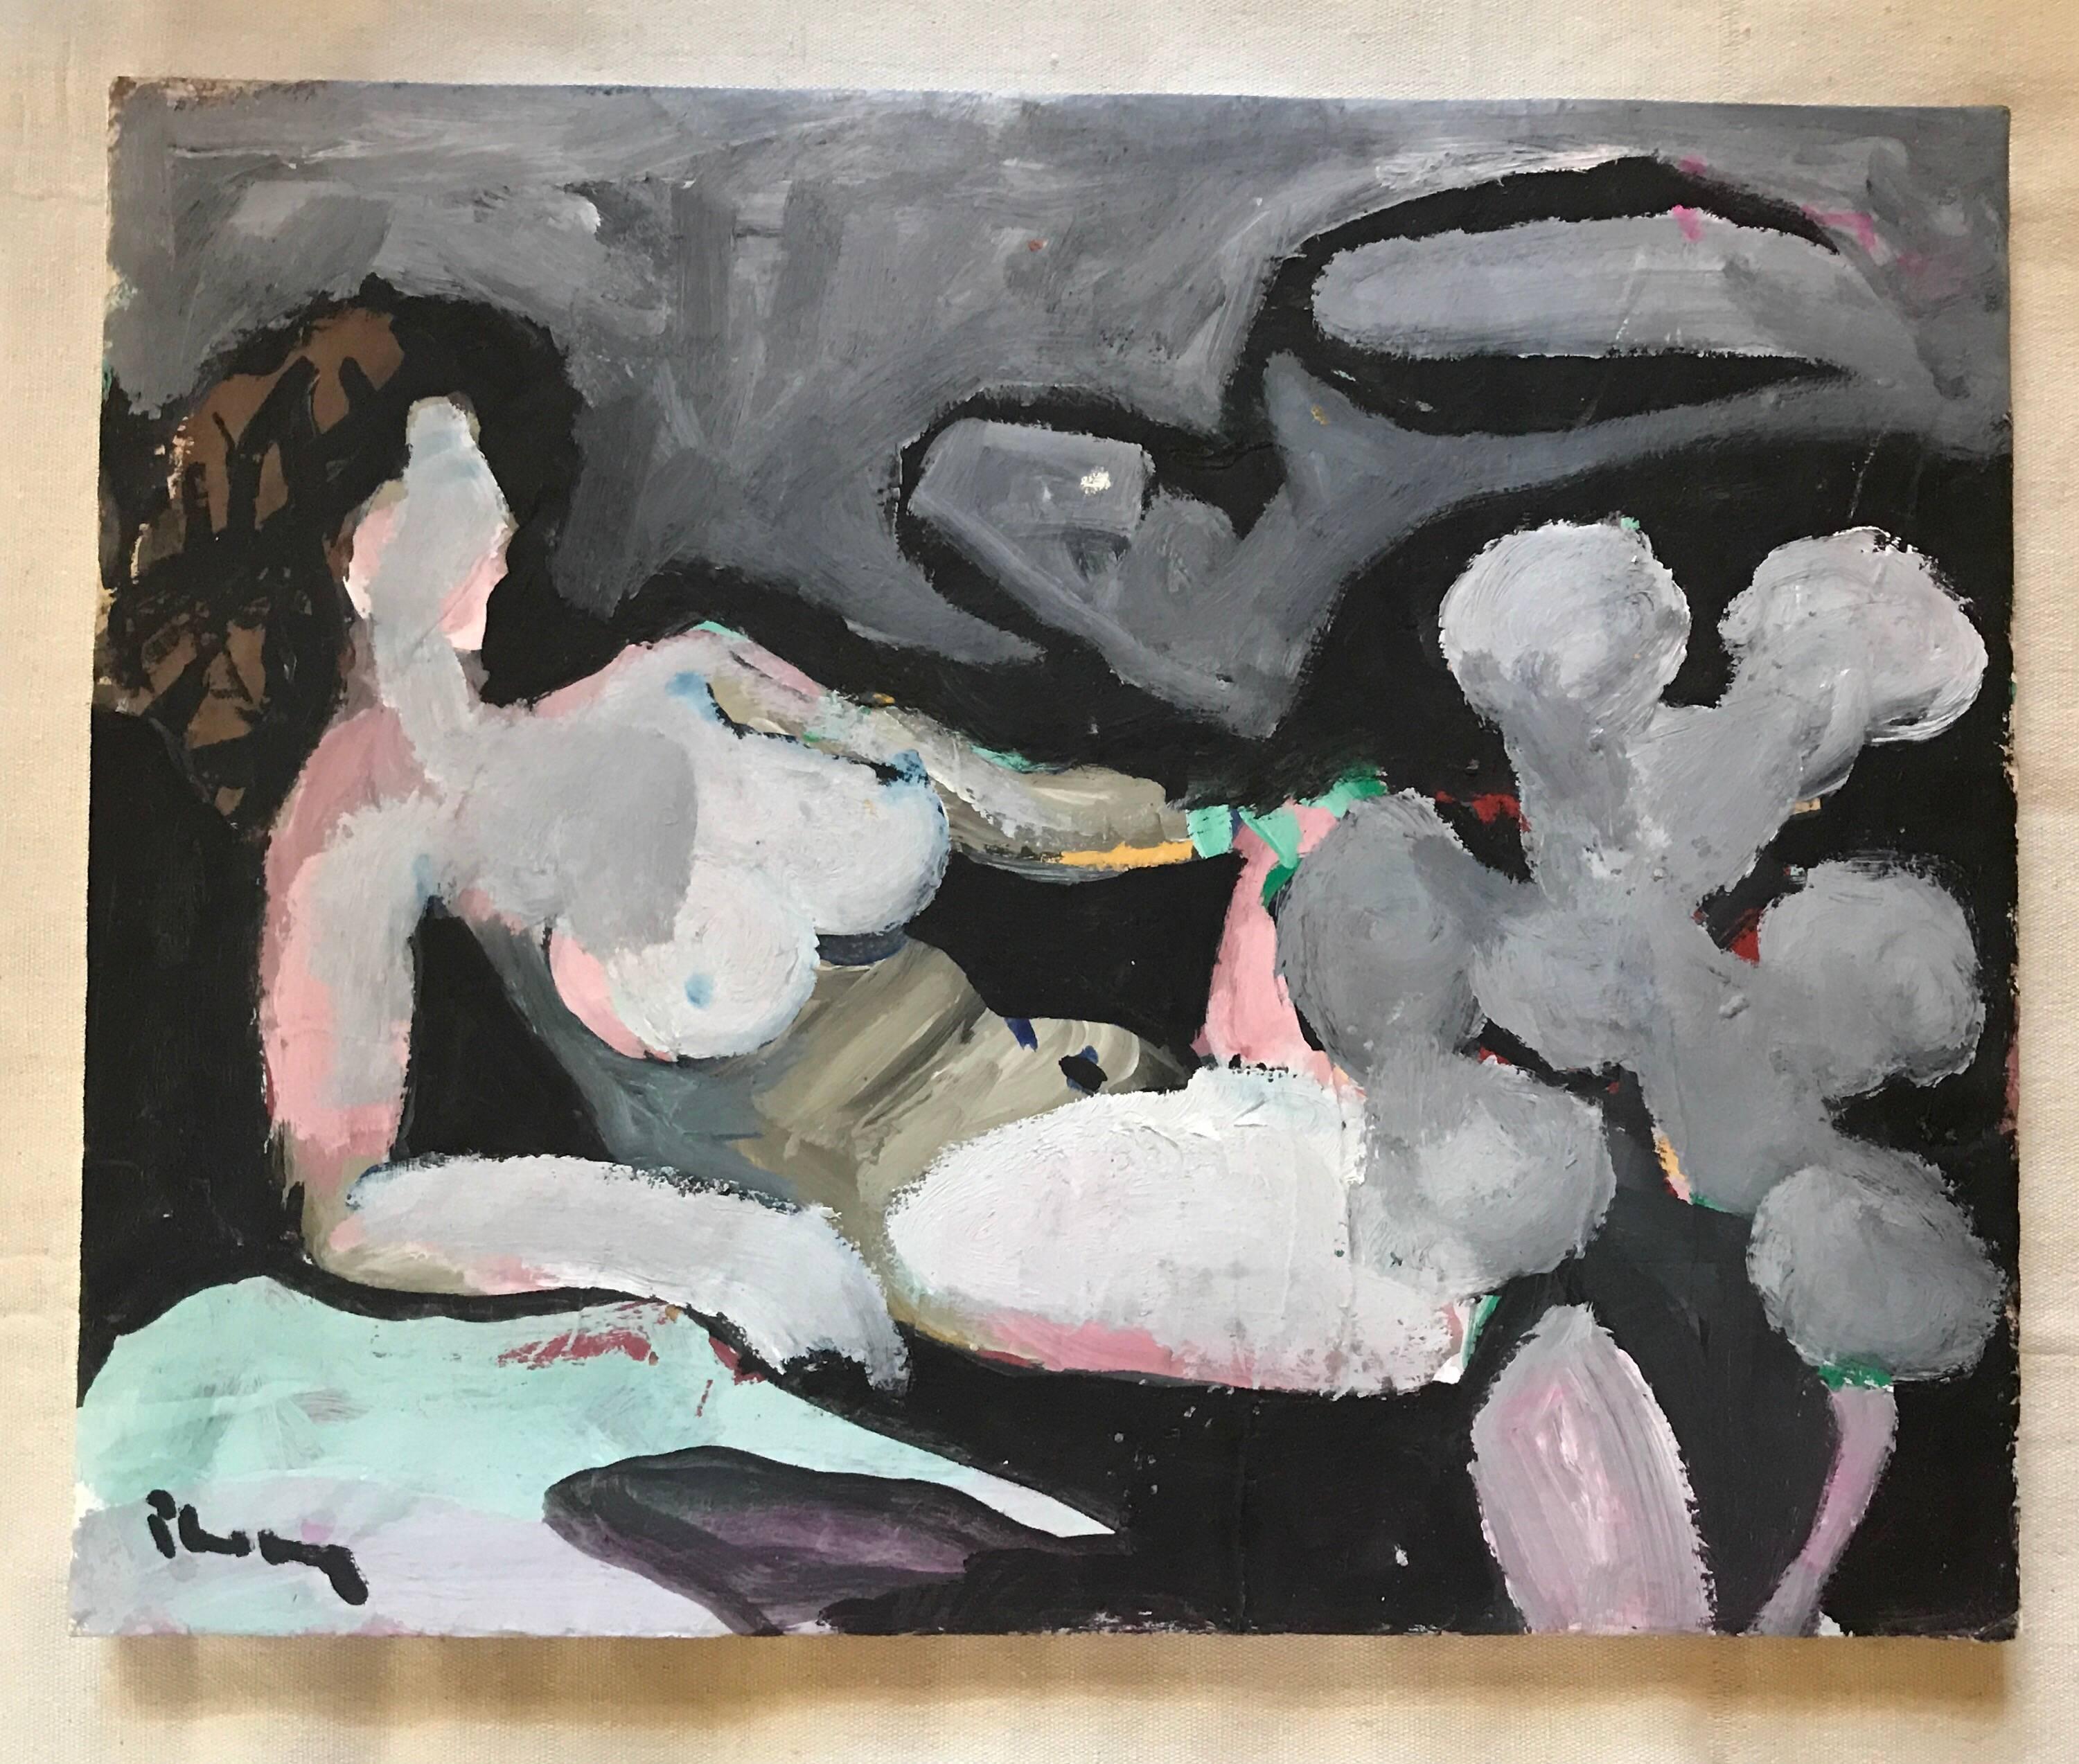 A lovely mixed media painting on paper of a reclined nude in the modern taste. The worked is housed and framed within an acrylic shadowbox frame. Signed but artist unknown to me. Perhaps you will discover a gem within the art world with this piece.